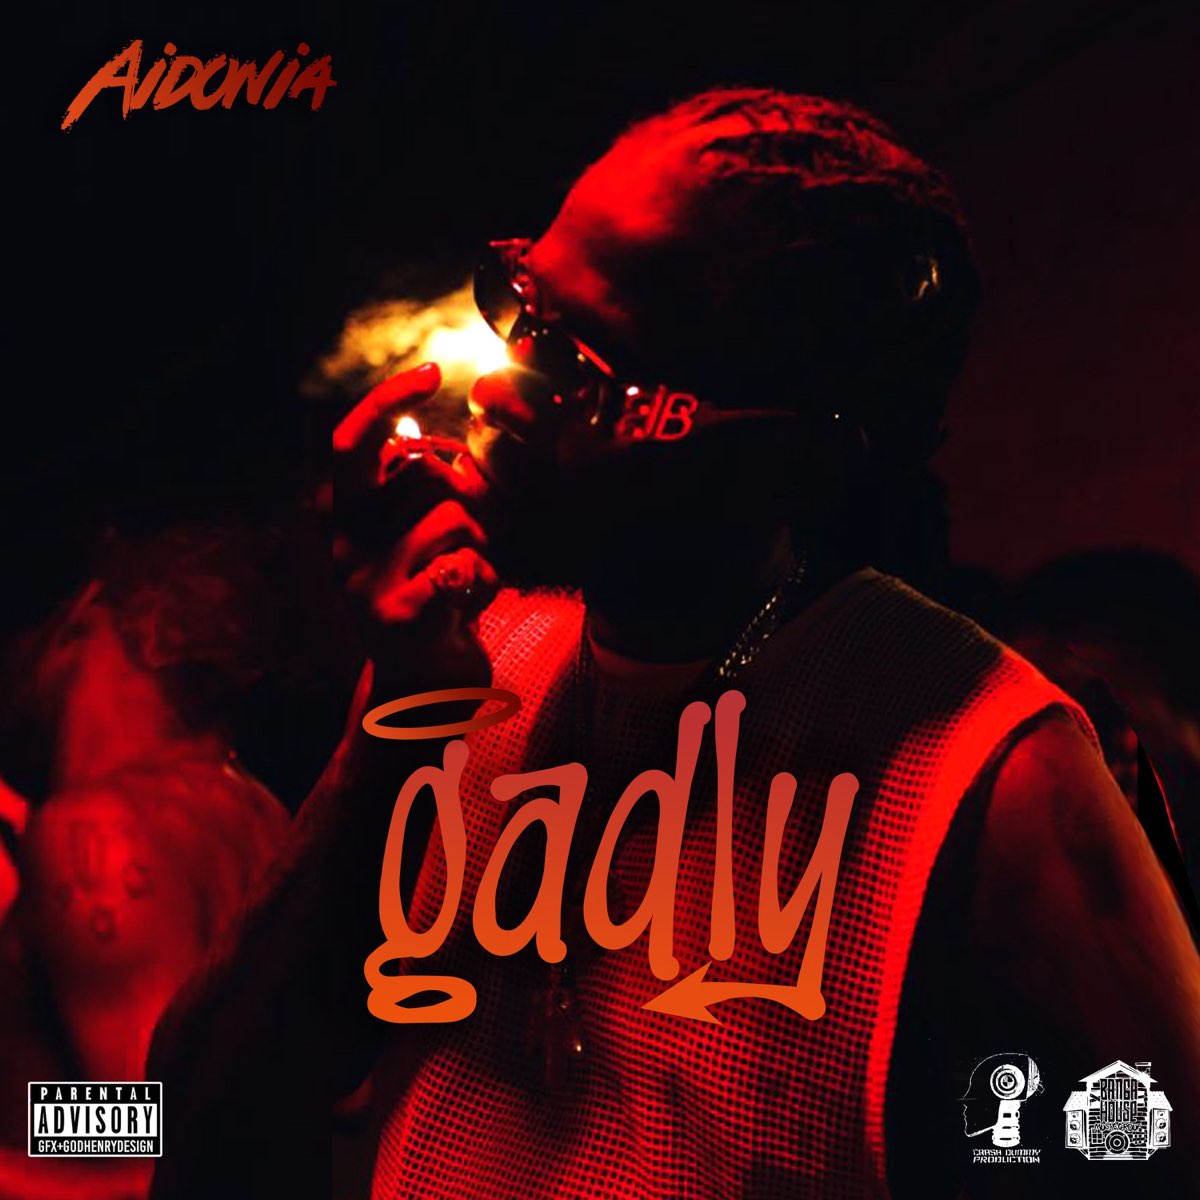 ‎gadly Single By Aidonia On Apple Music 